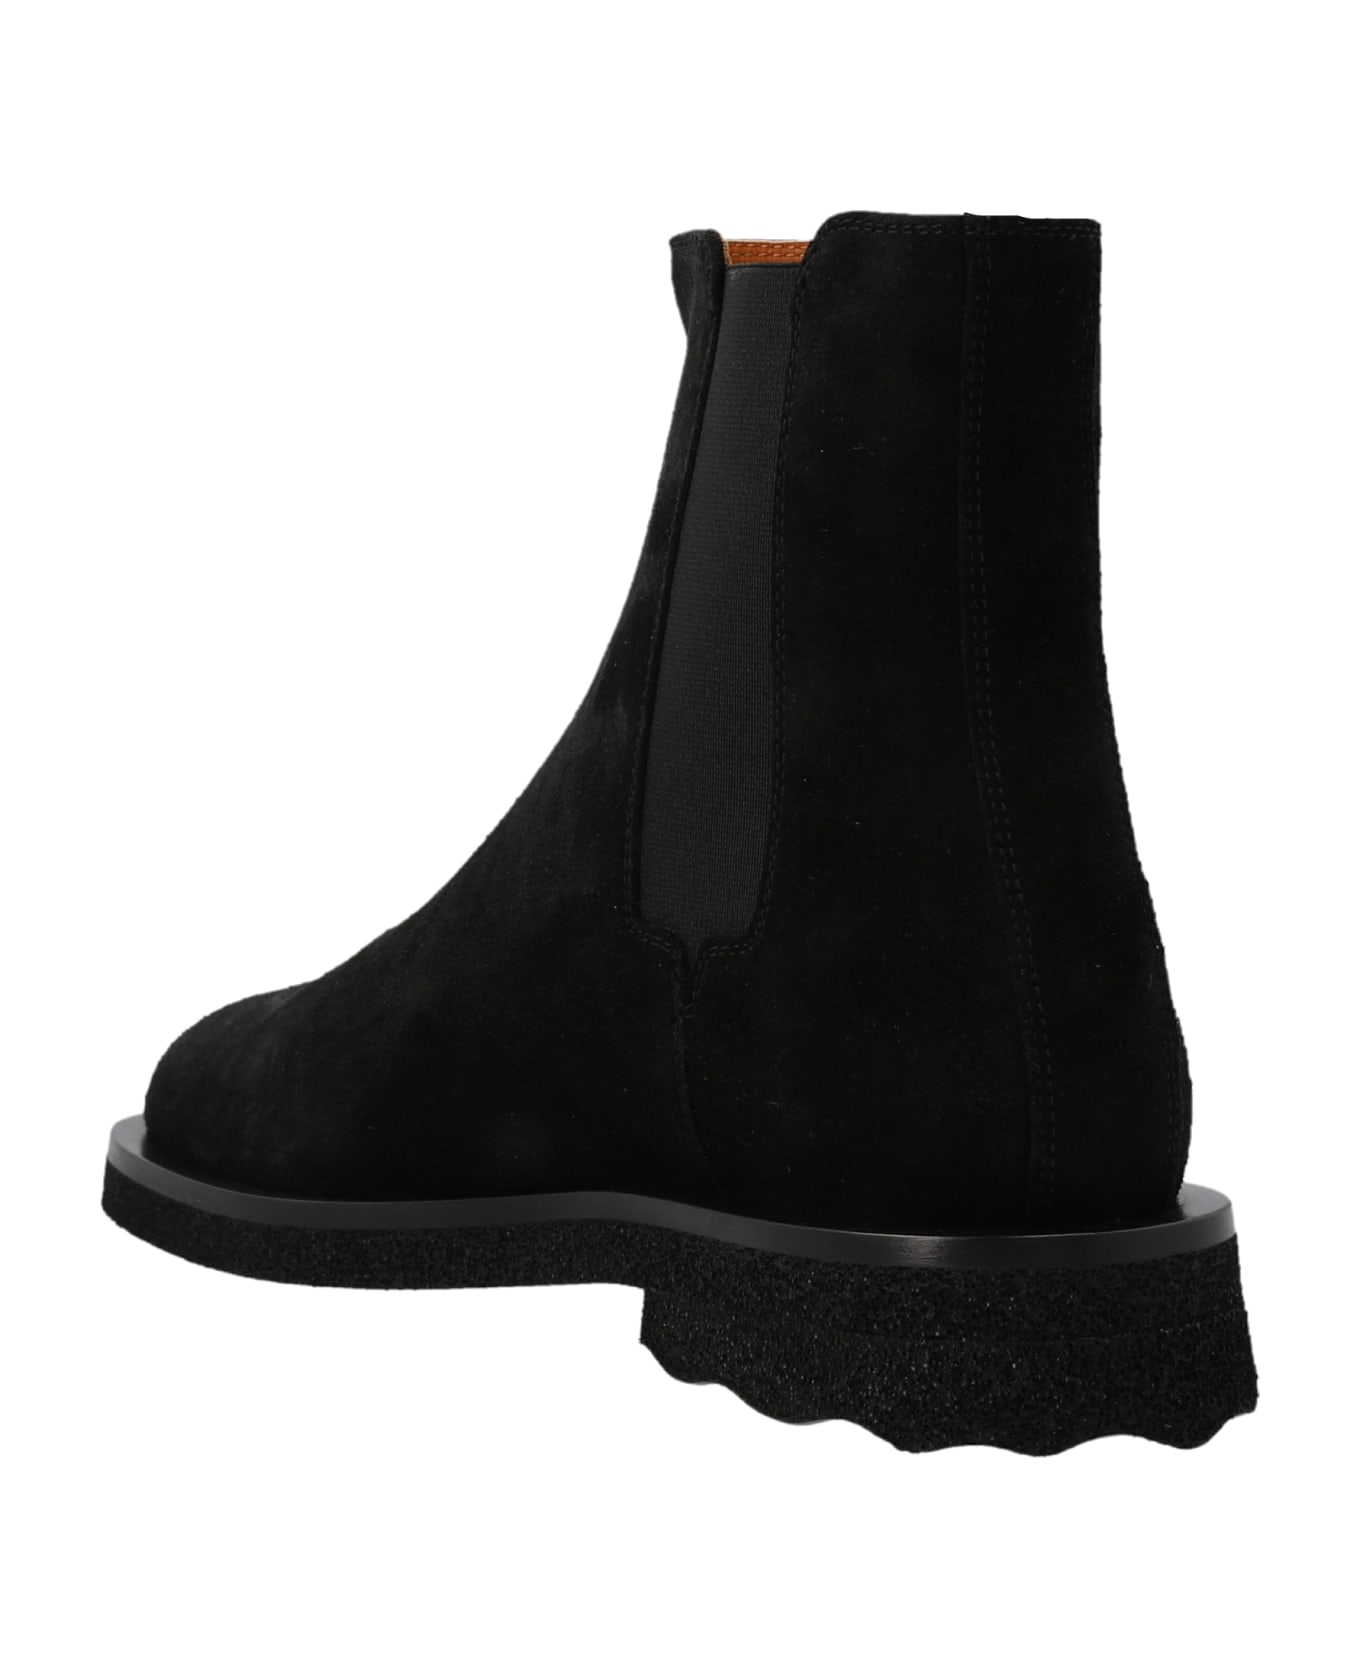 Off-White 'spongesole' Ankle Boots - Black  